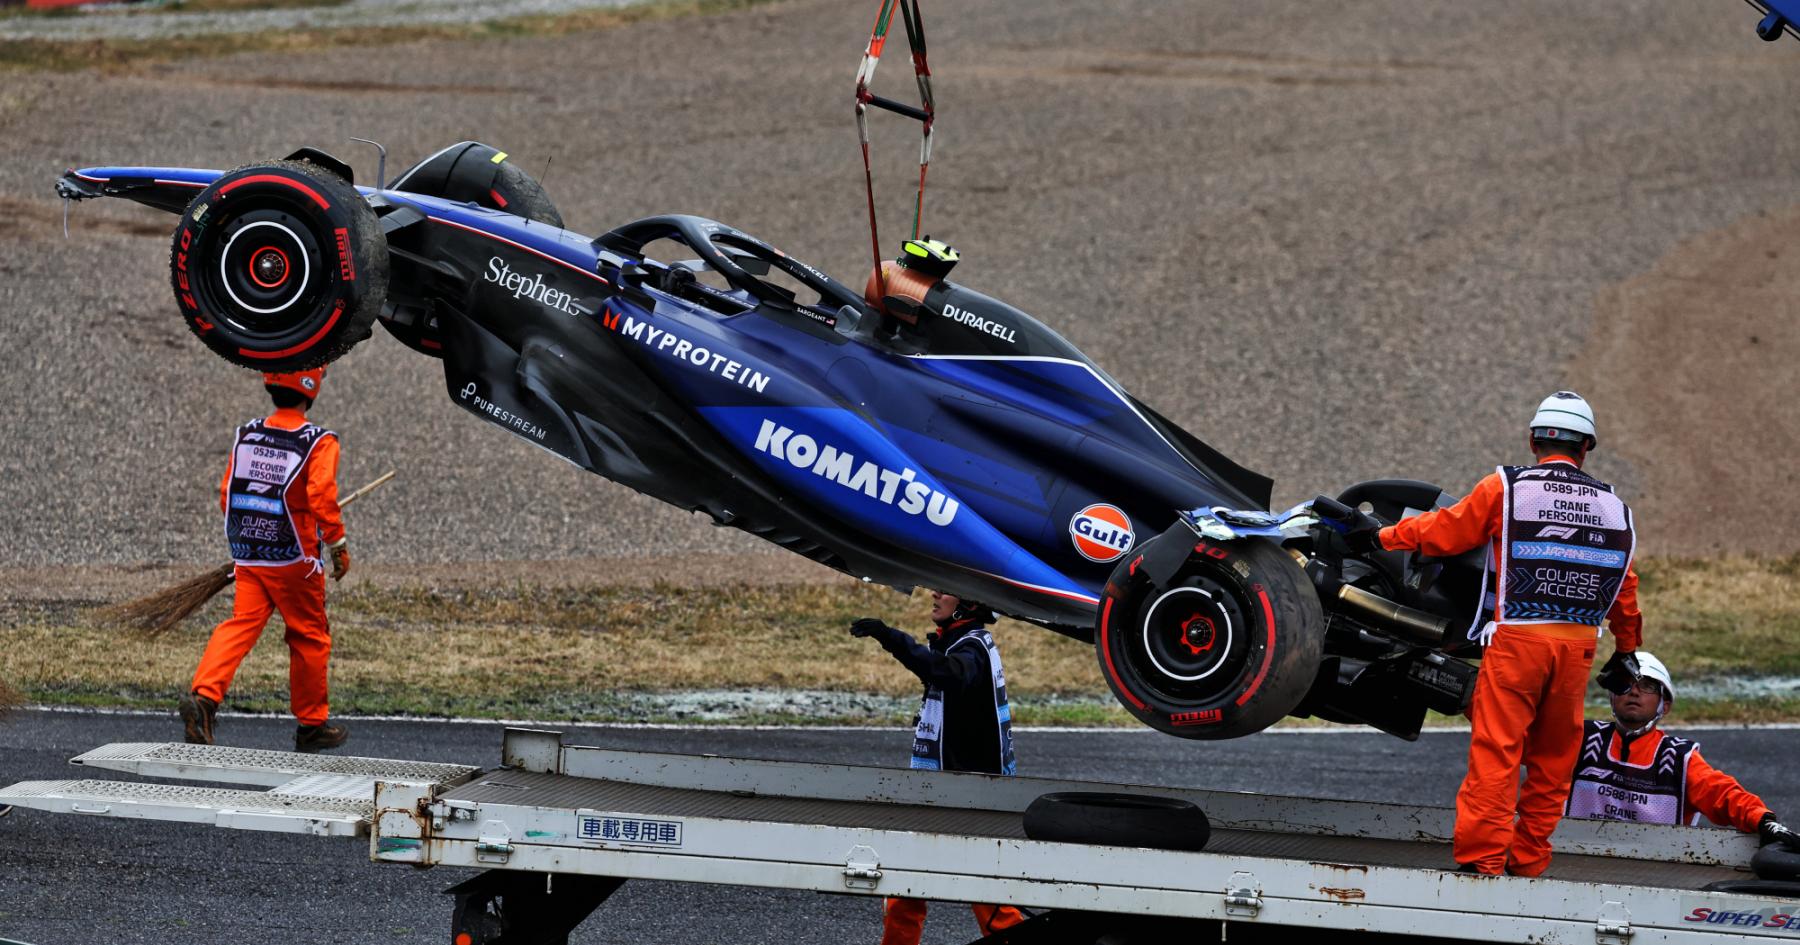 Williams reveal chassis condition after Sargeant's Japan crash